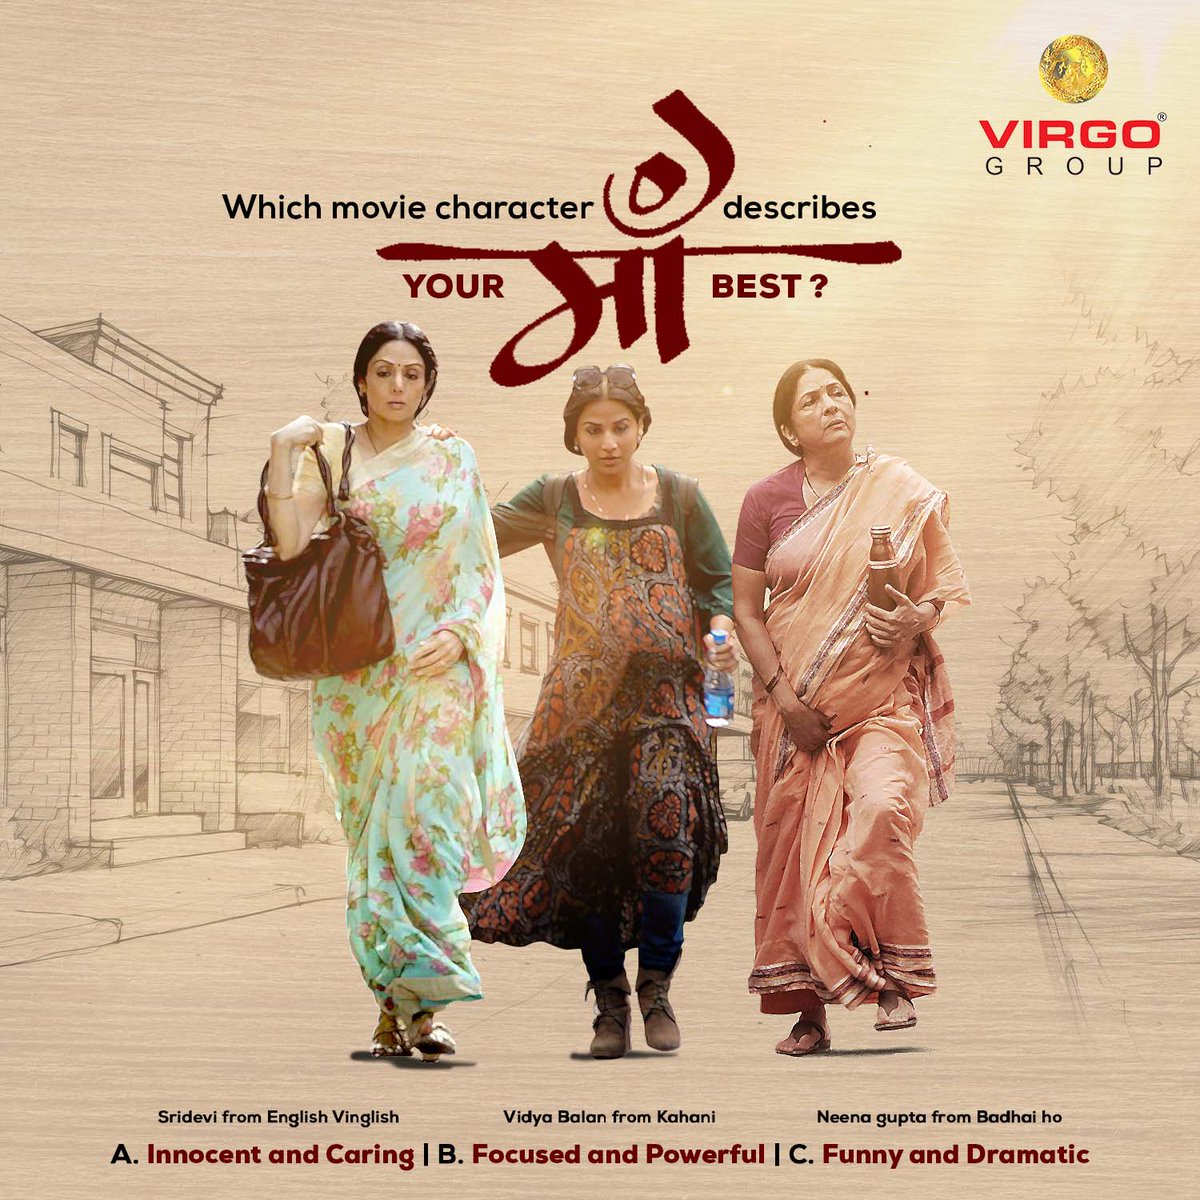 Tell us which character resonates with your mother the most and be ready to get lucky with an Amazon voucher. Mention your answer in the comment section and stay tuned for more. #BeautifulShadesOfMaa #virgolaminates #architect #contest #ContestTime #giveawayalert #participatenow